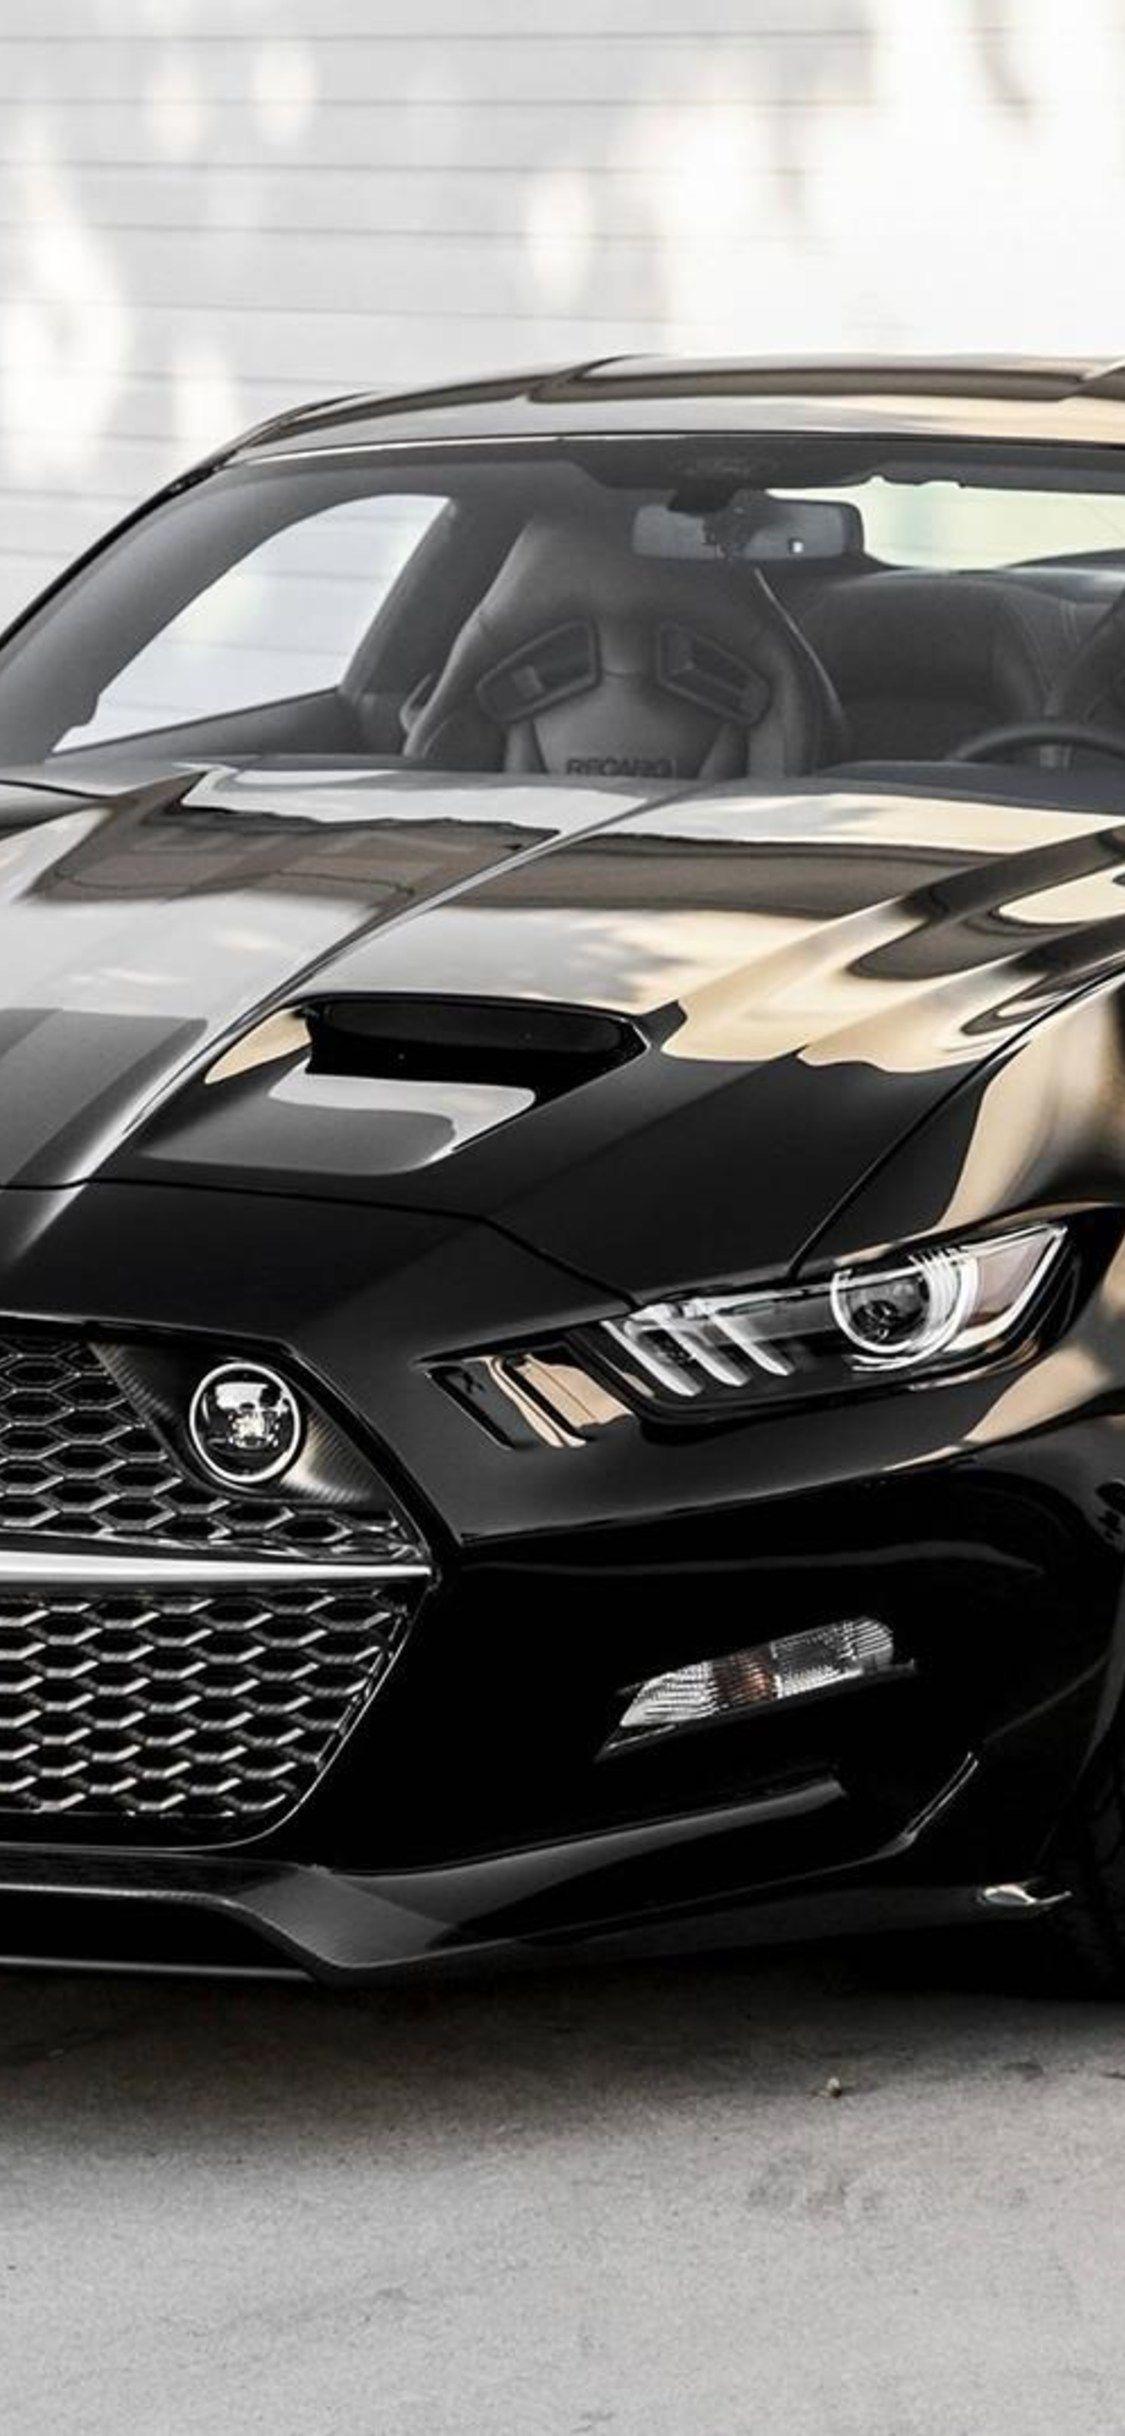 Mustang Car Wallpapers For Iphone